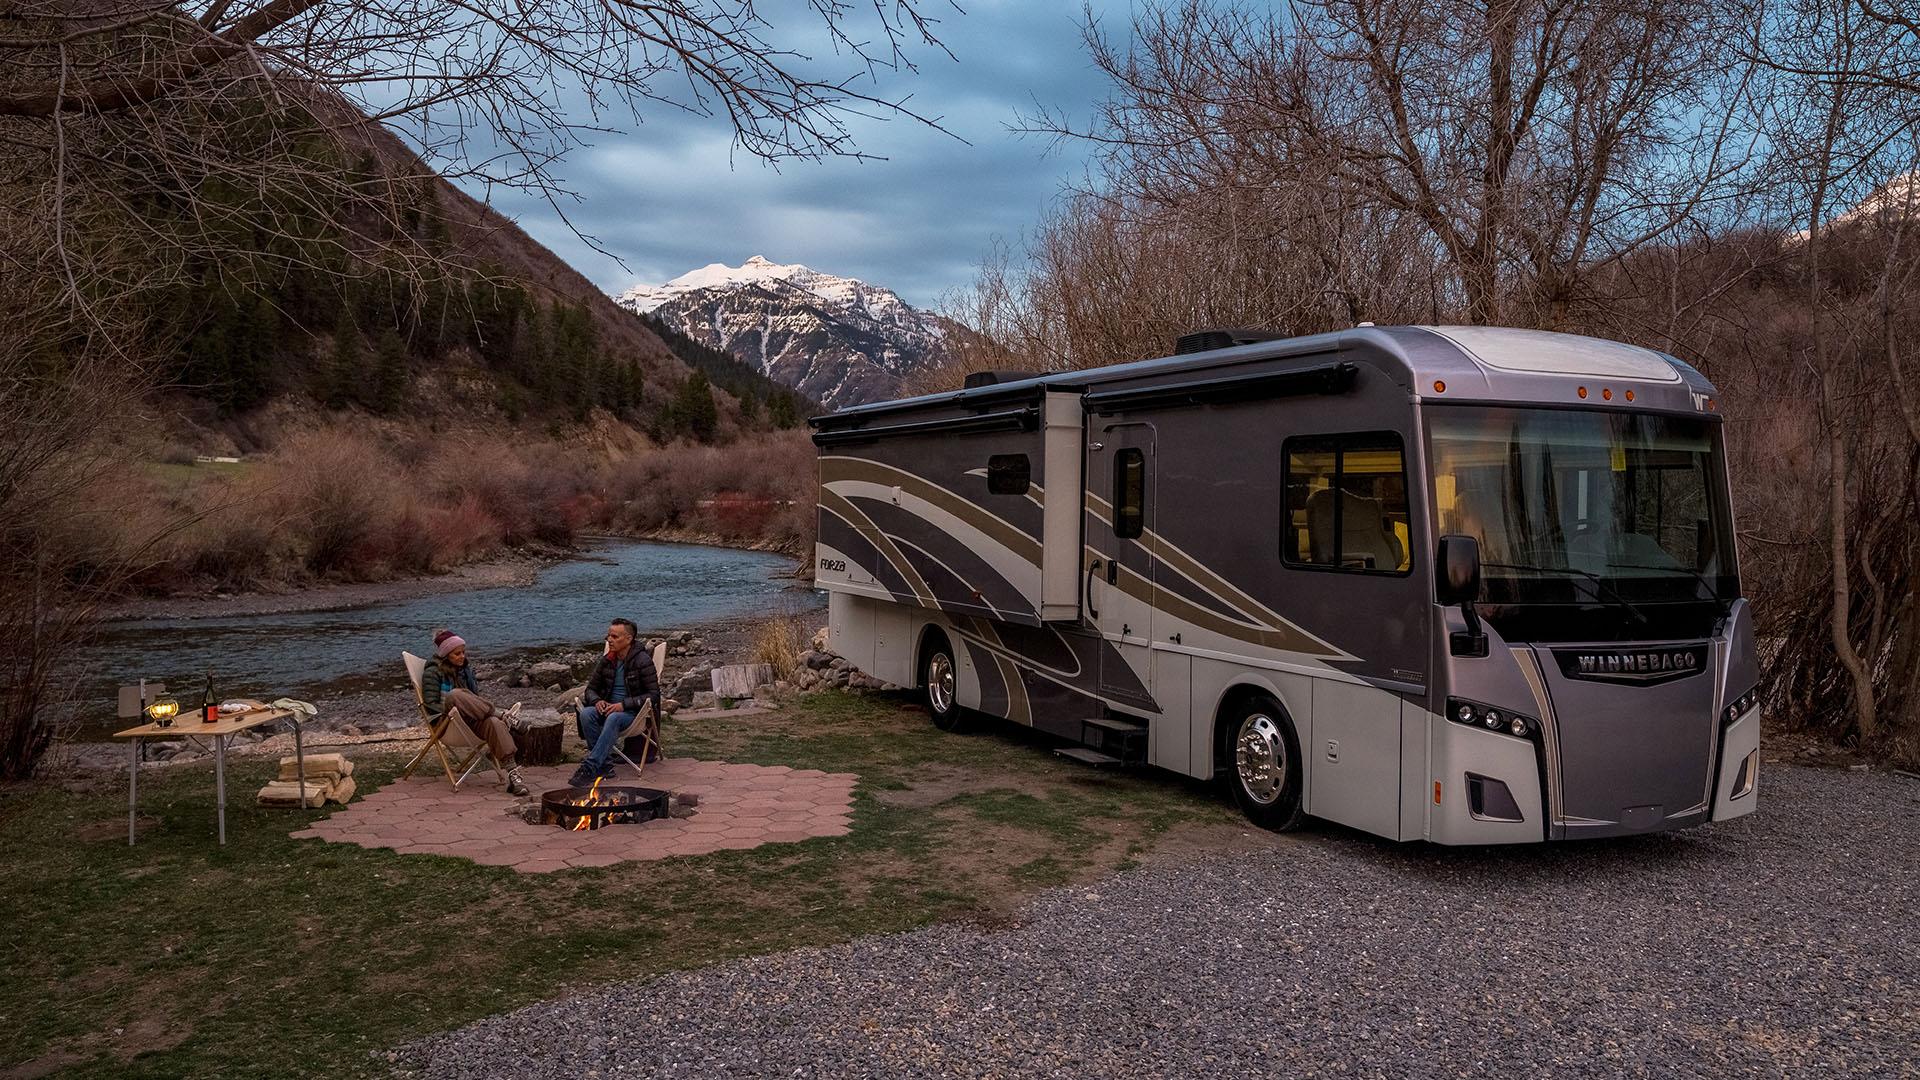 Two people sitting by a campfire beside their Winnebago RV, with a body of water and mountain in the background